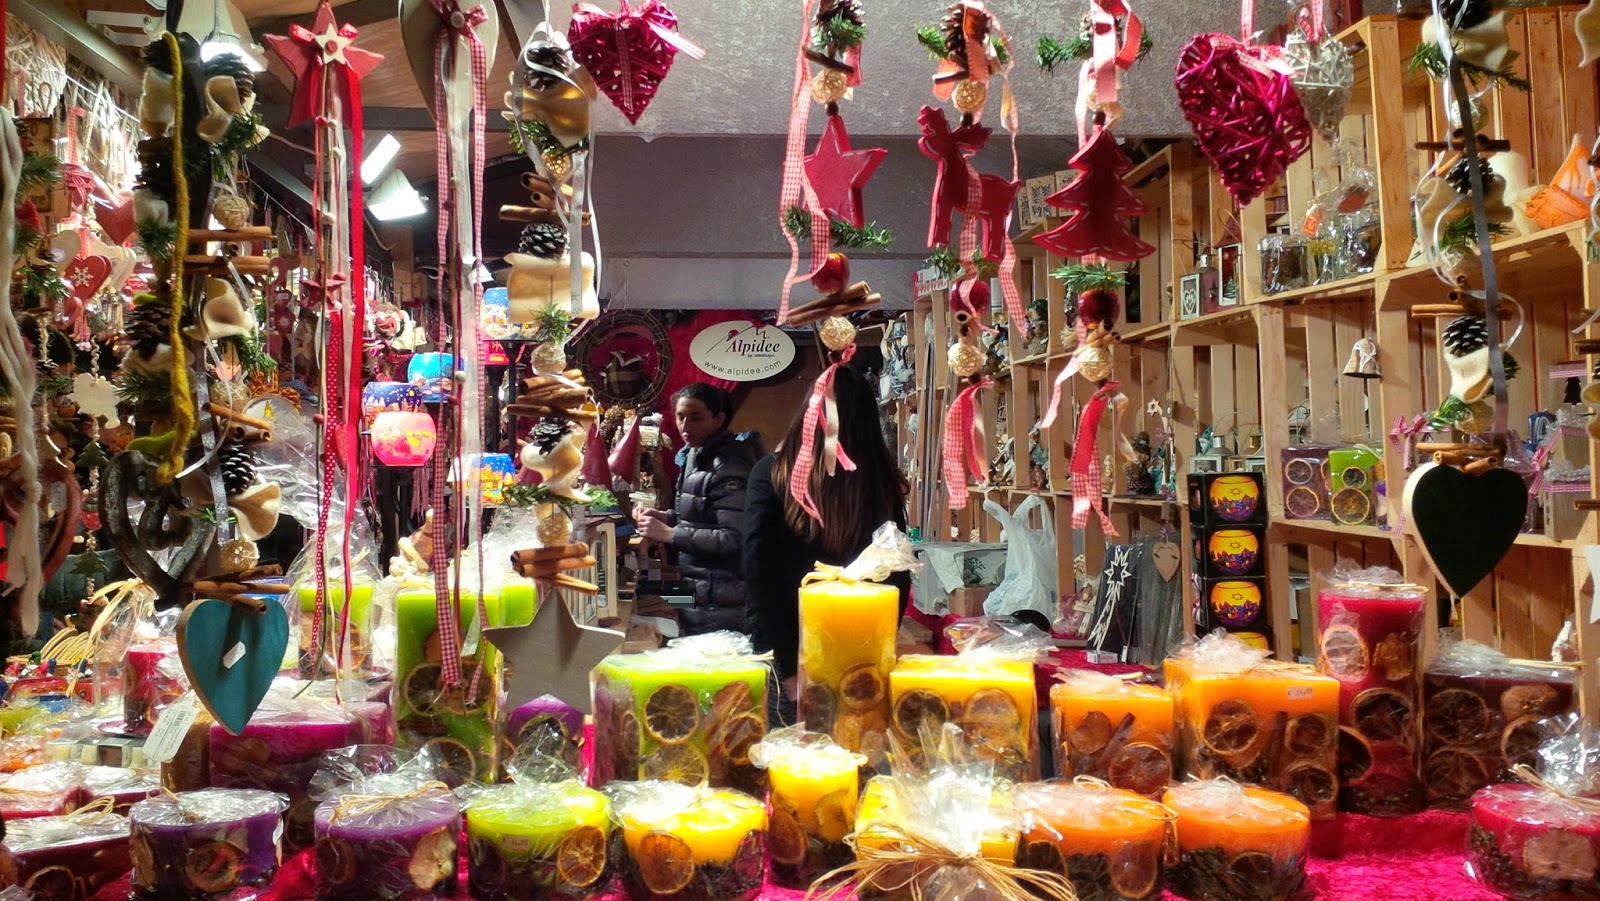 A candles stall at the Christmas market in Verona